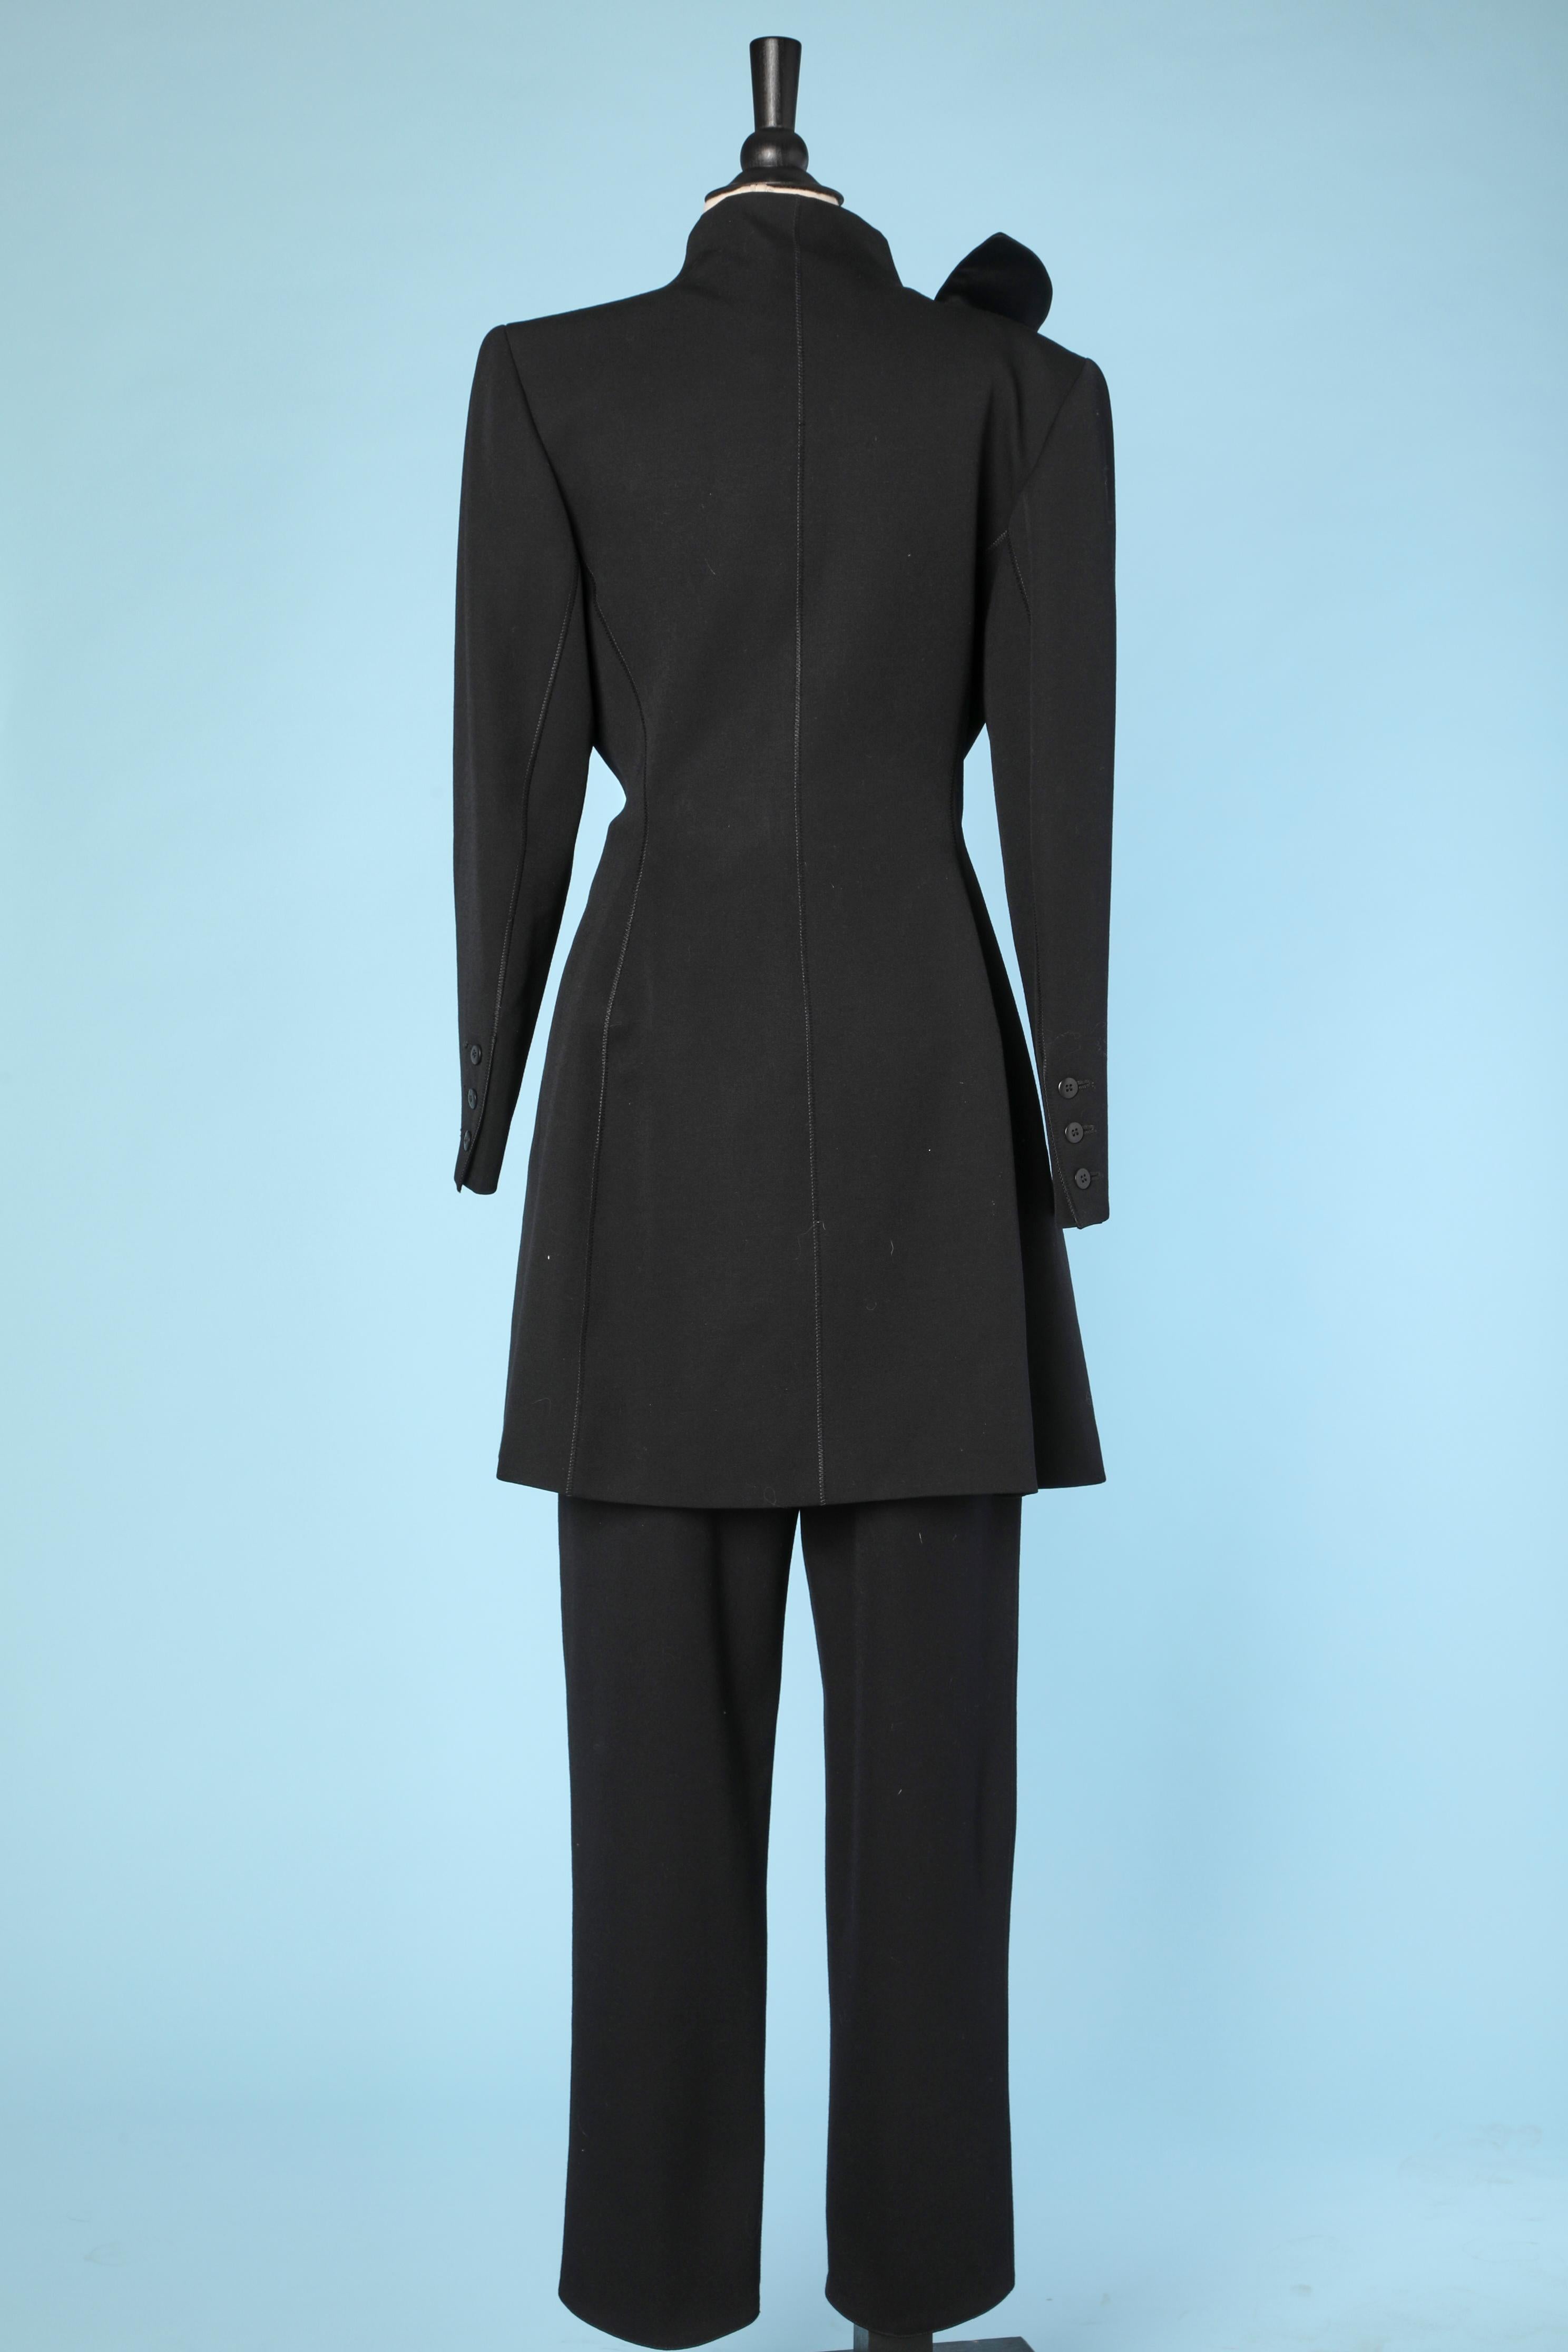 Black trouser pant suit in dry wool and graphic collar Claude Montana 1